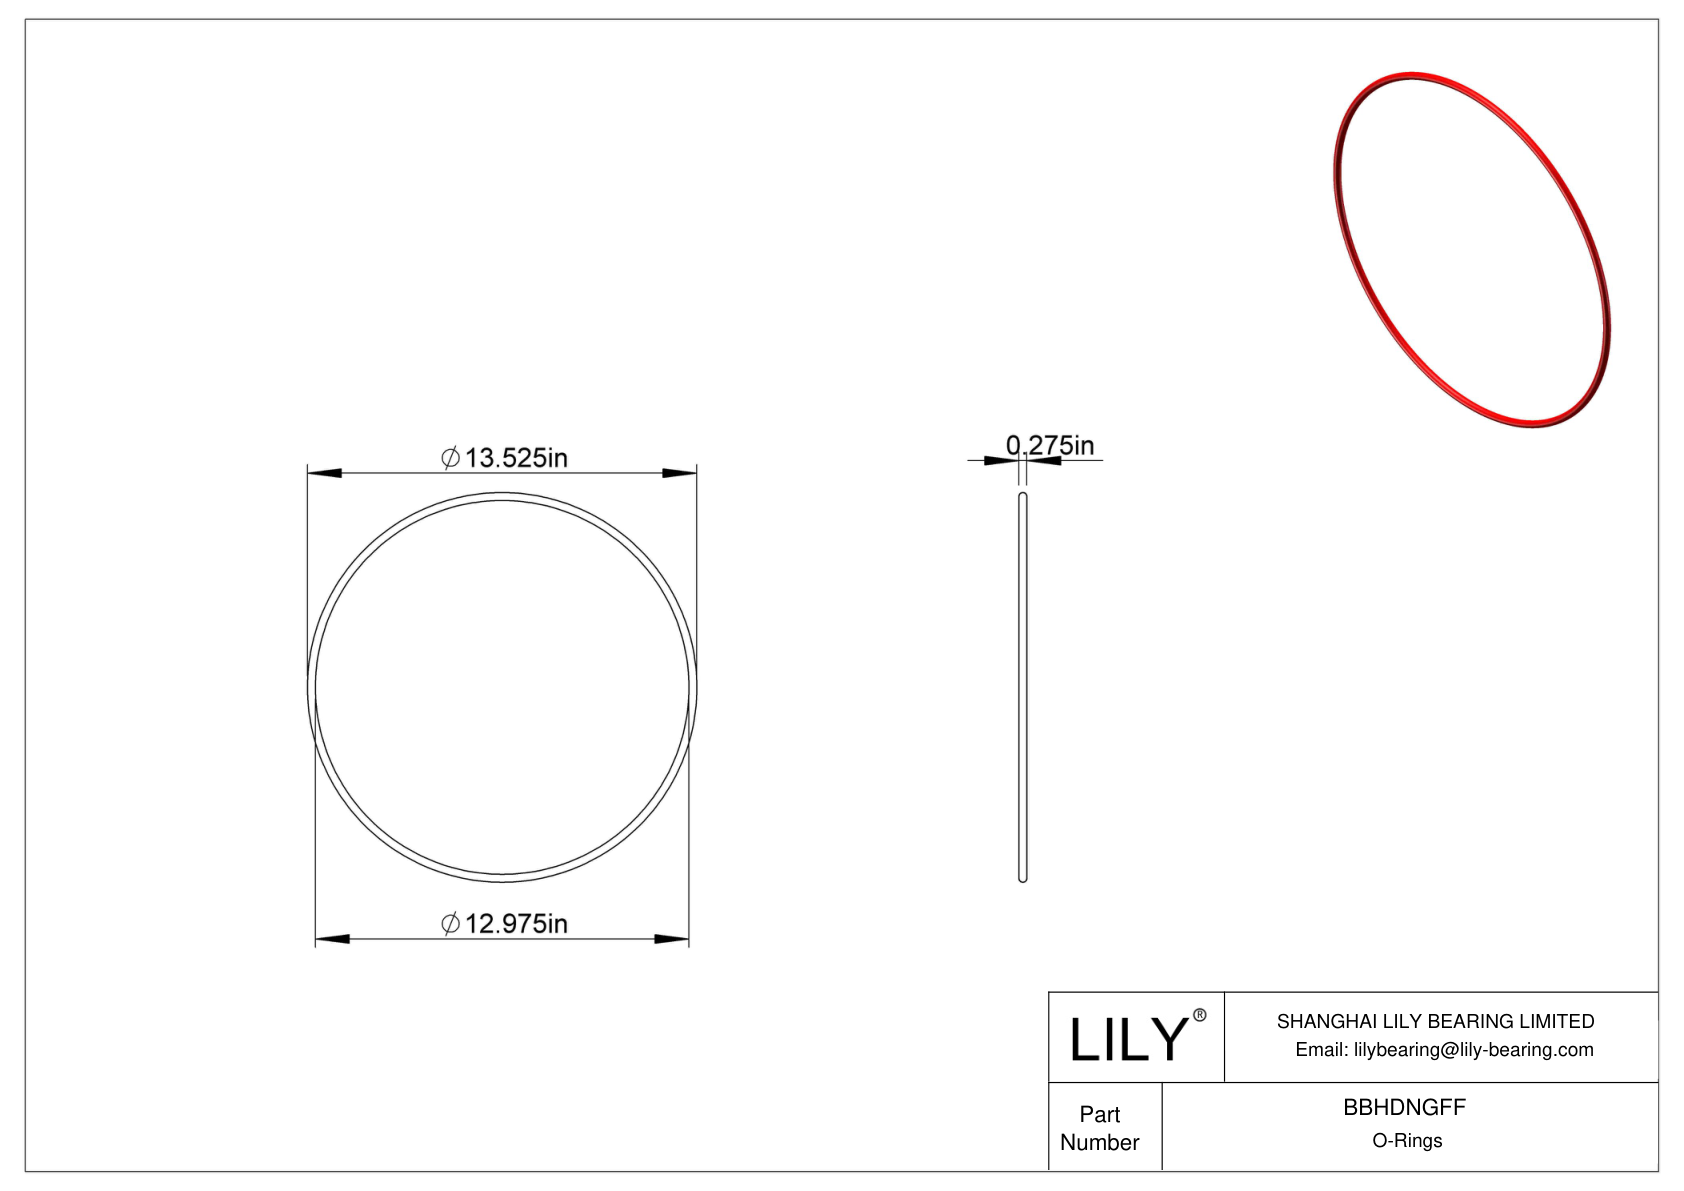 BBHDNGFF High Temperature O-Rings Round cad drawing